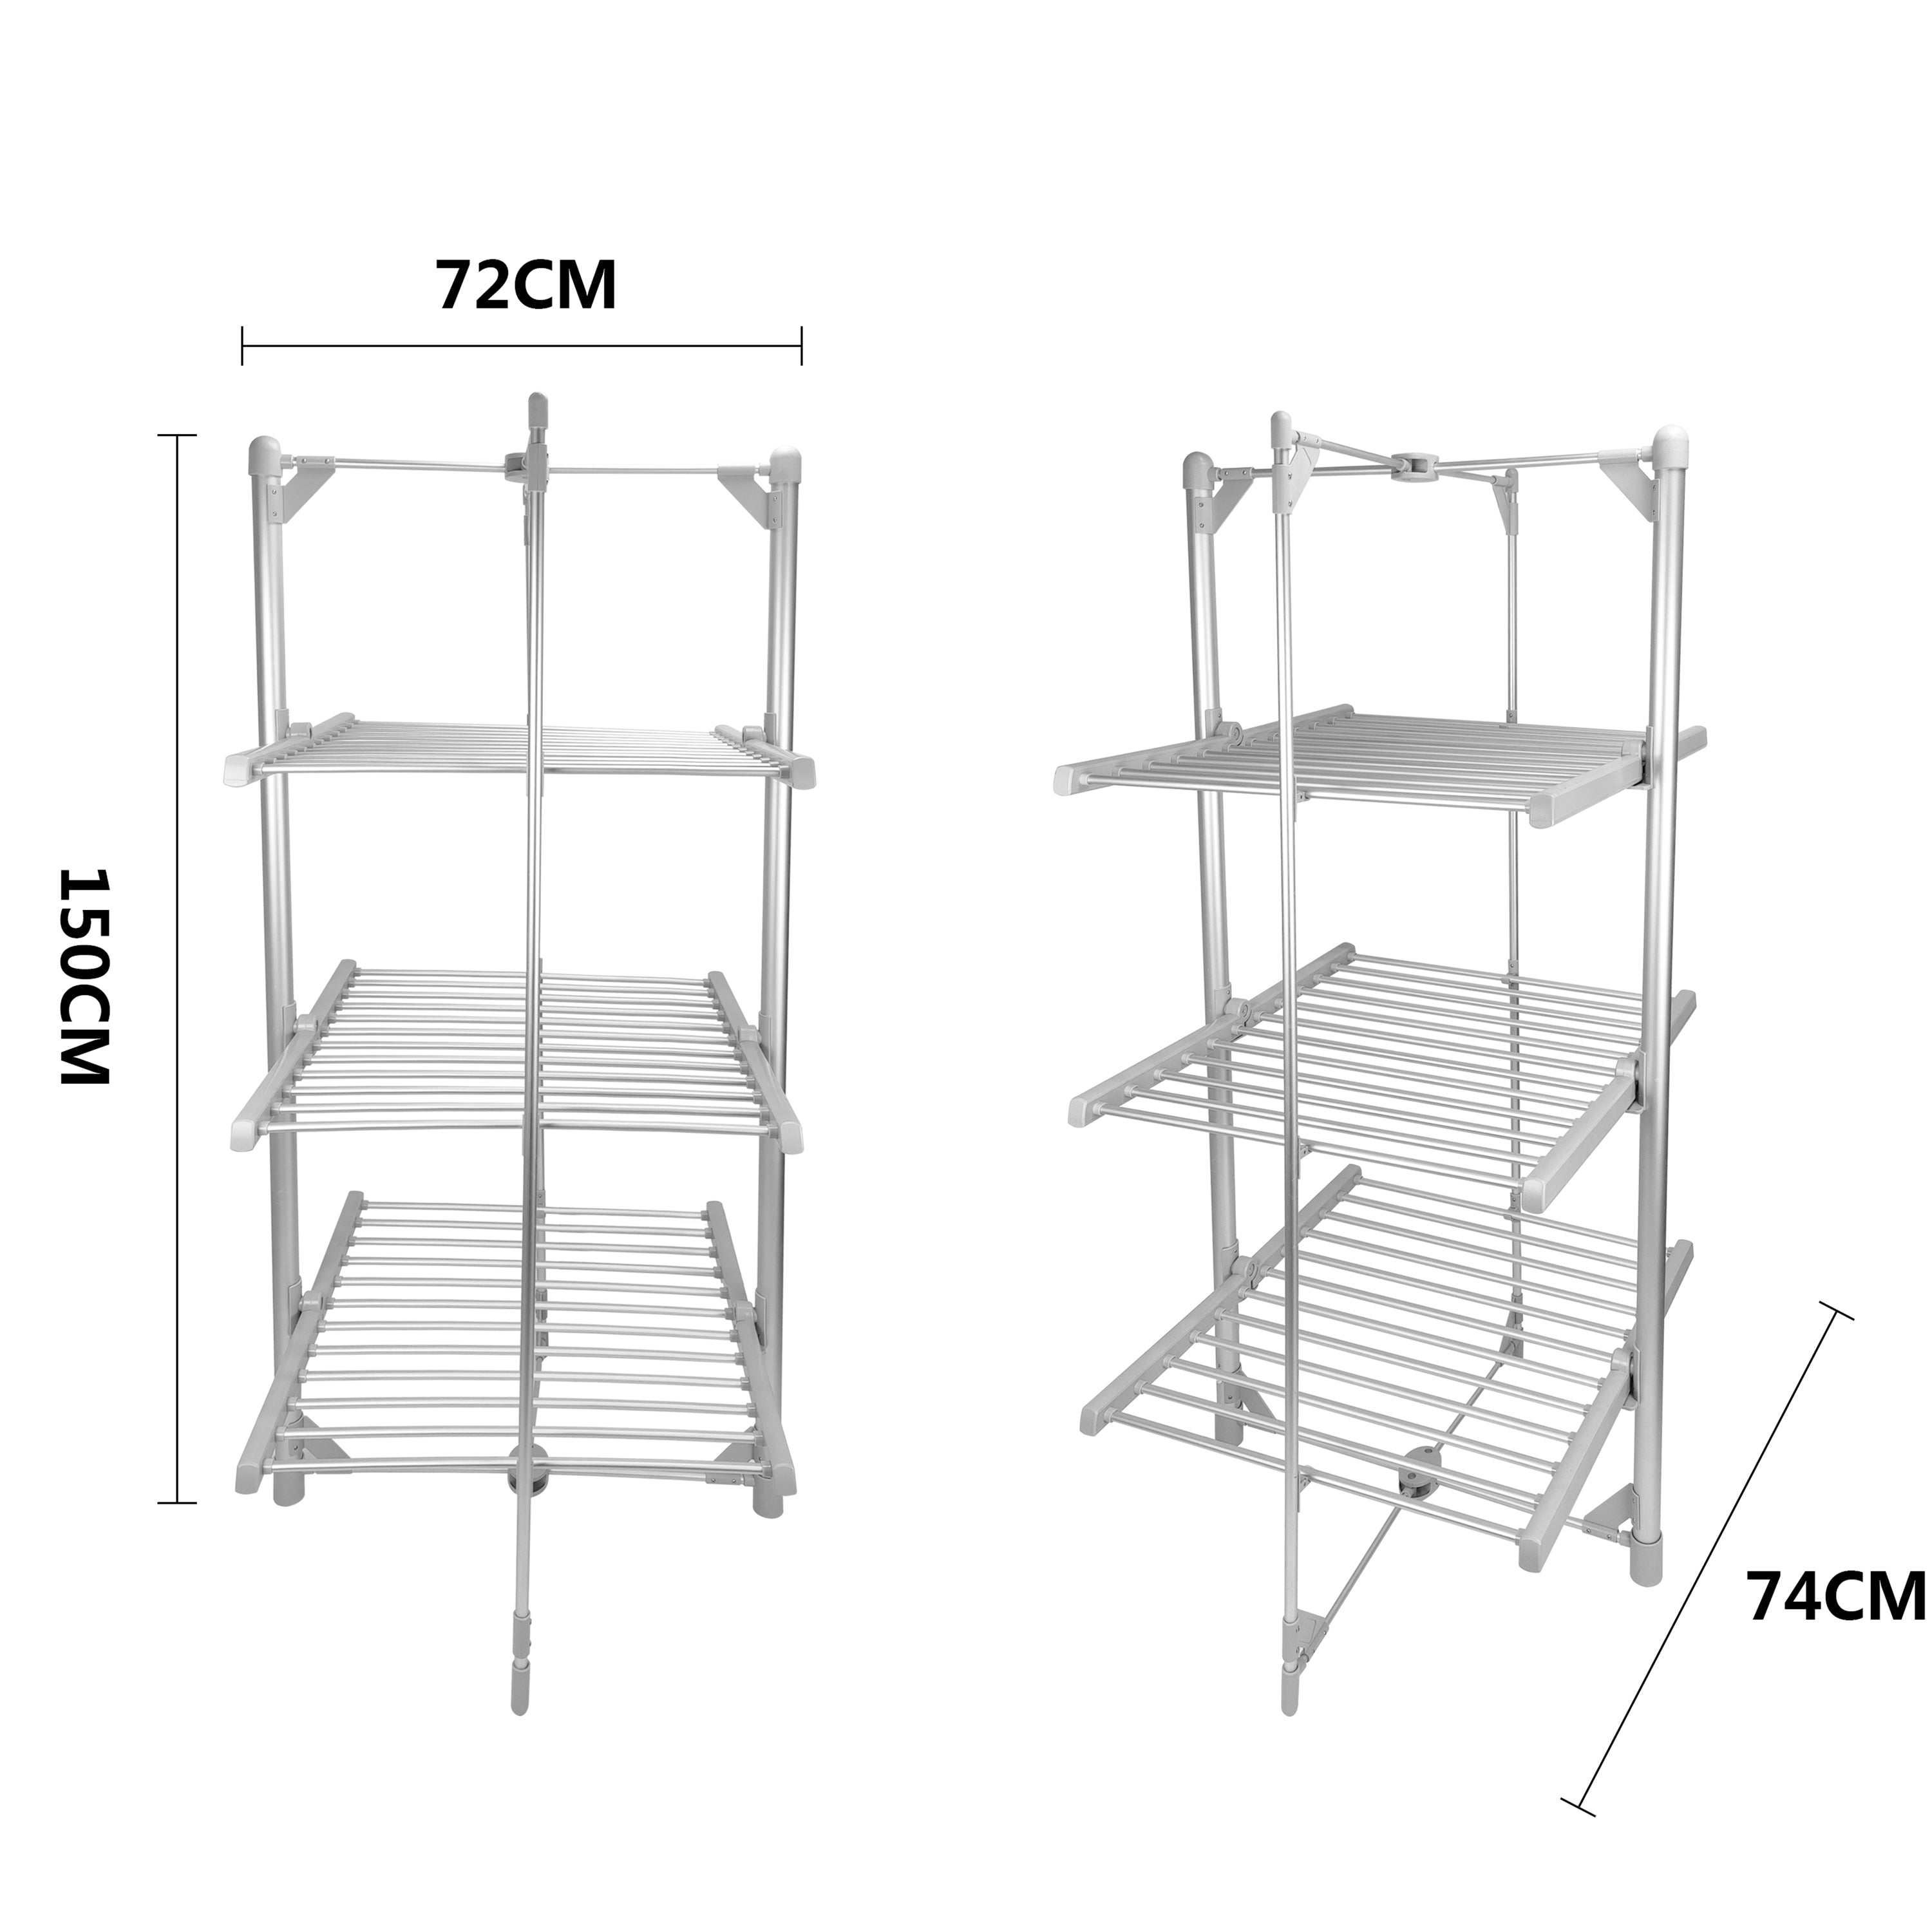  TOOLF Clothes Drying Rack, 3-Tier Collapsible Laundry